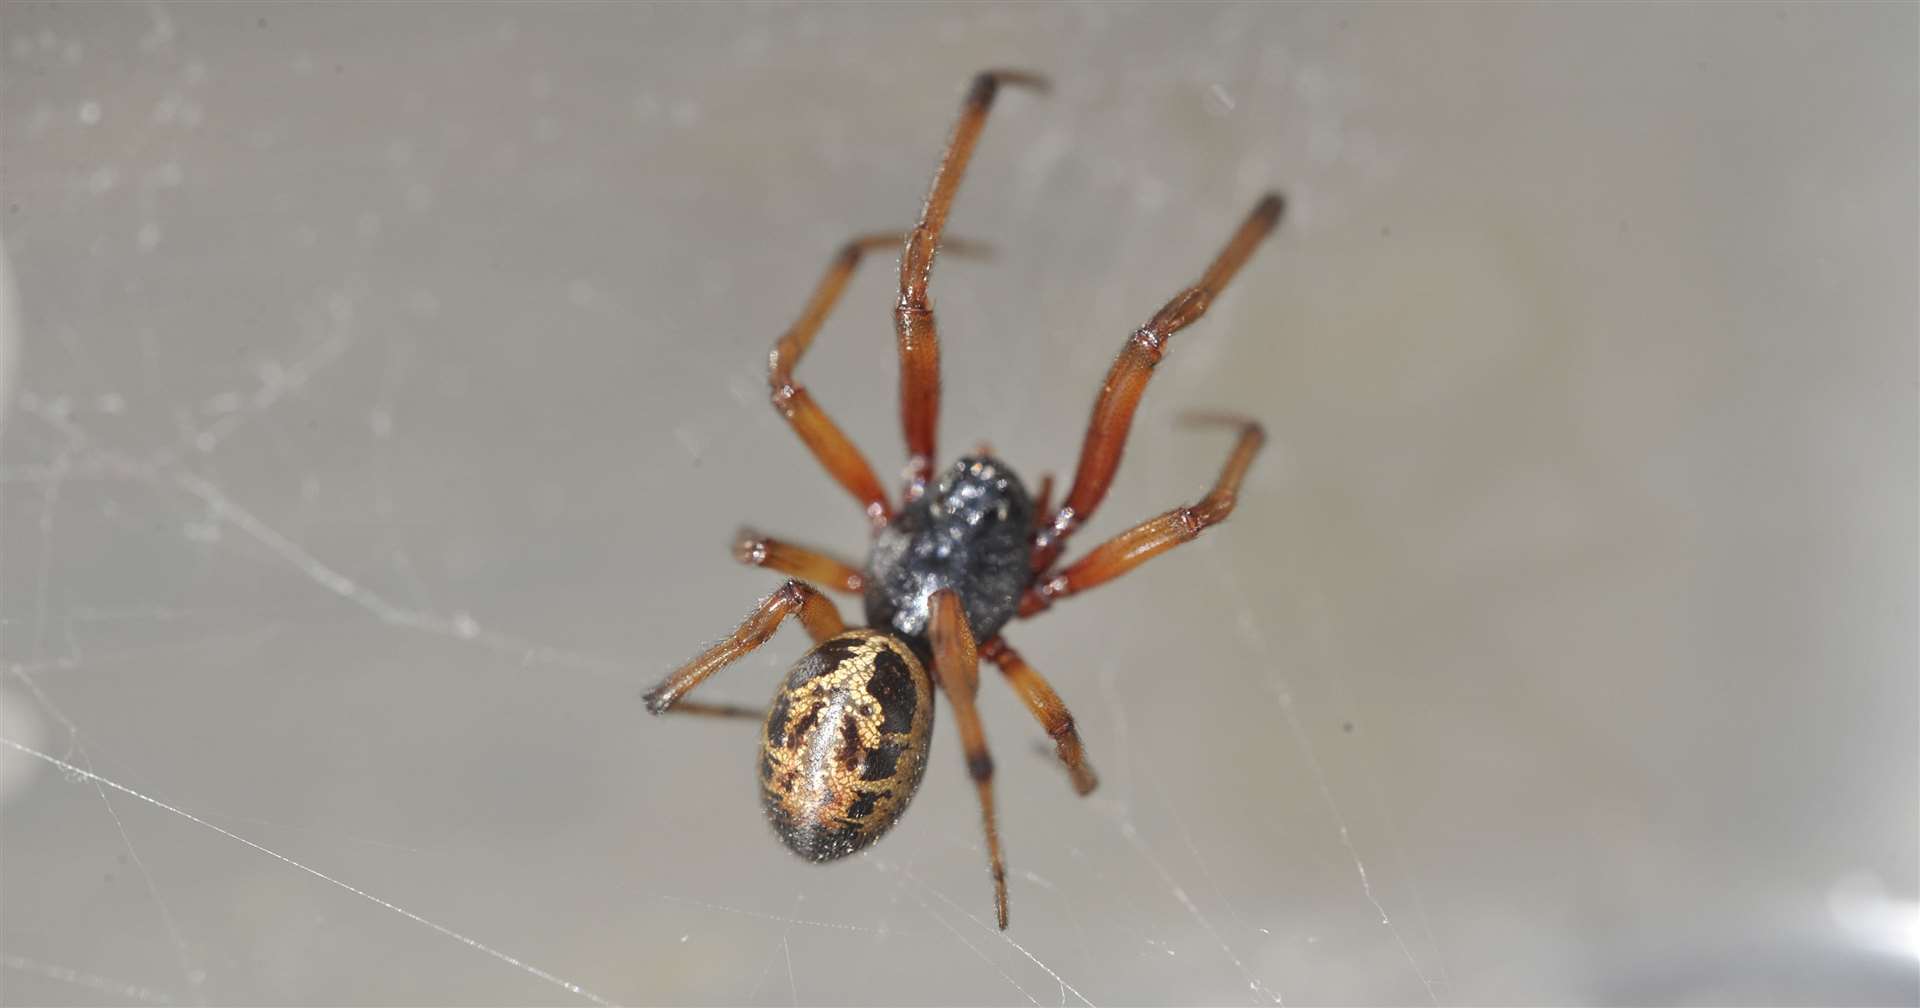 Spider mating season tends to start in September but the wet weather is thought to be sending many species indoors early